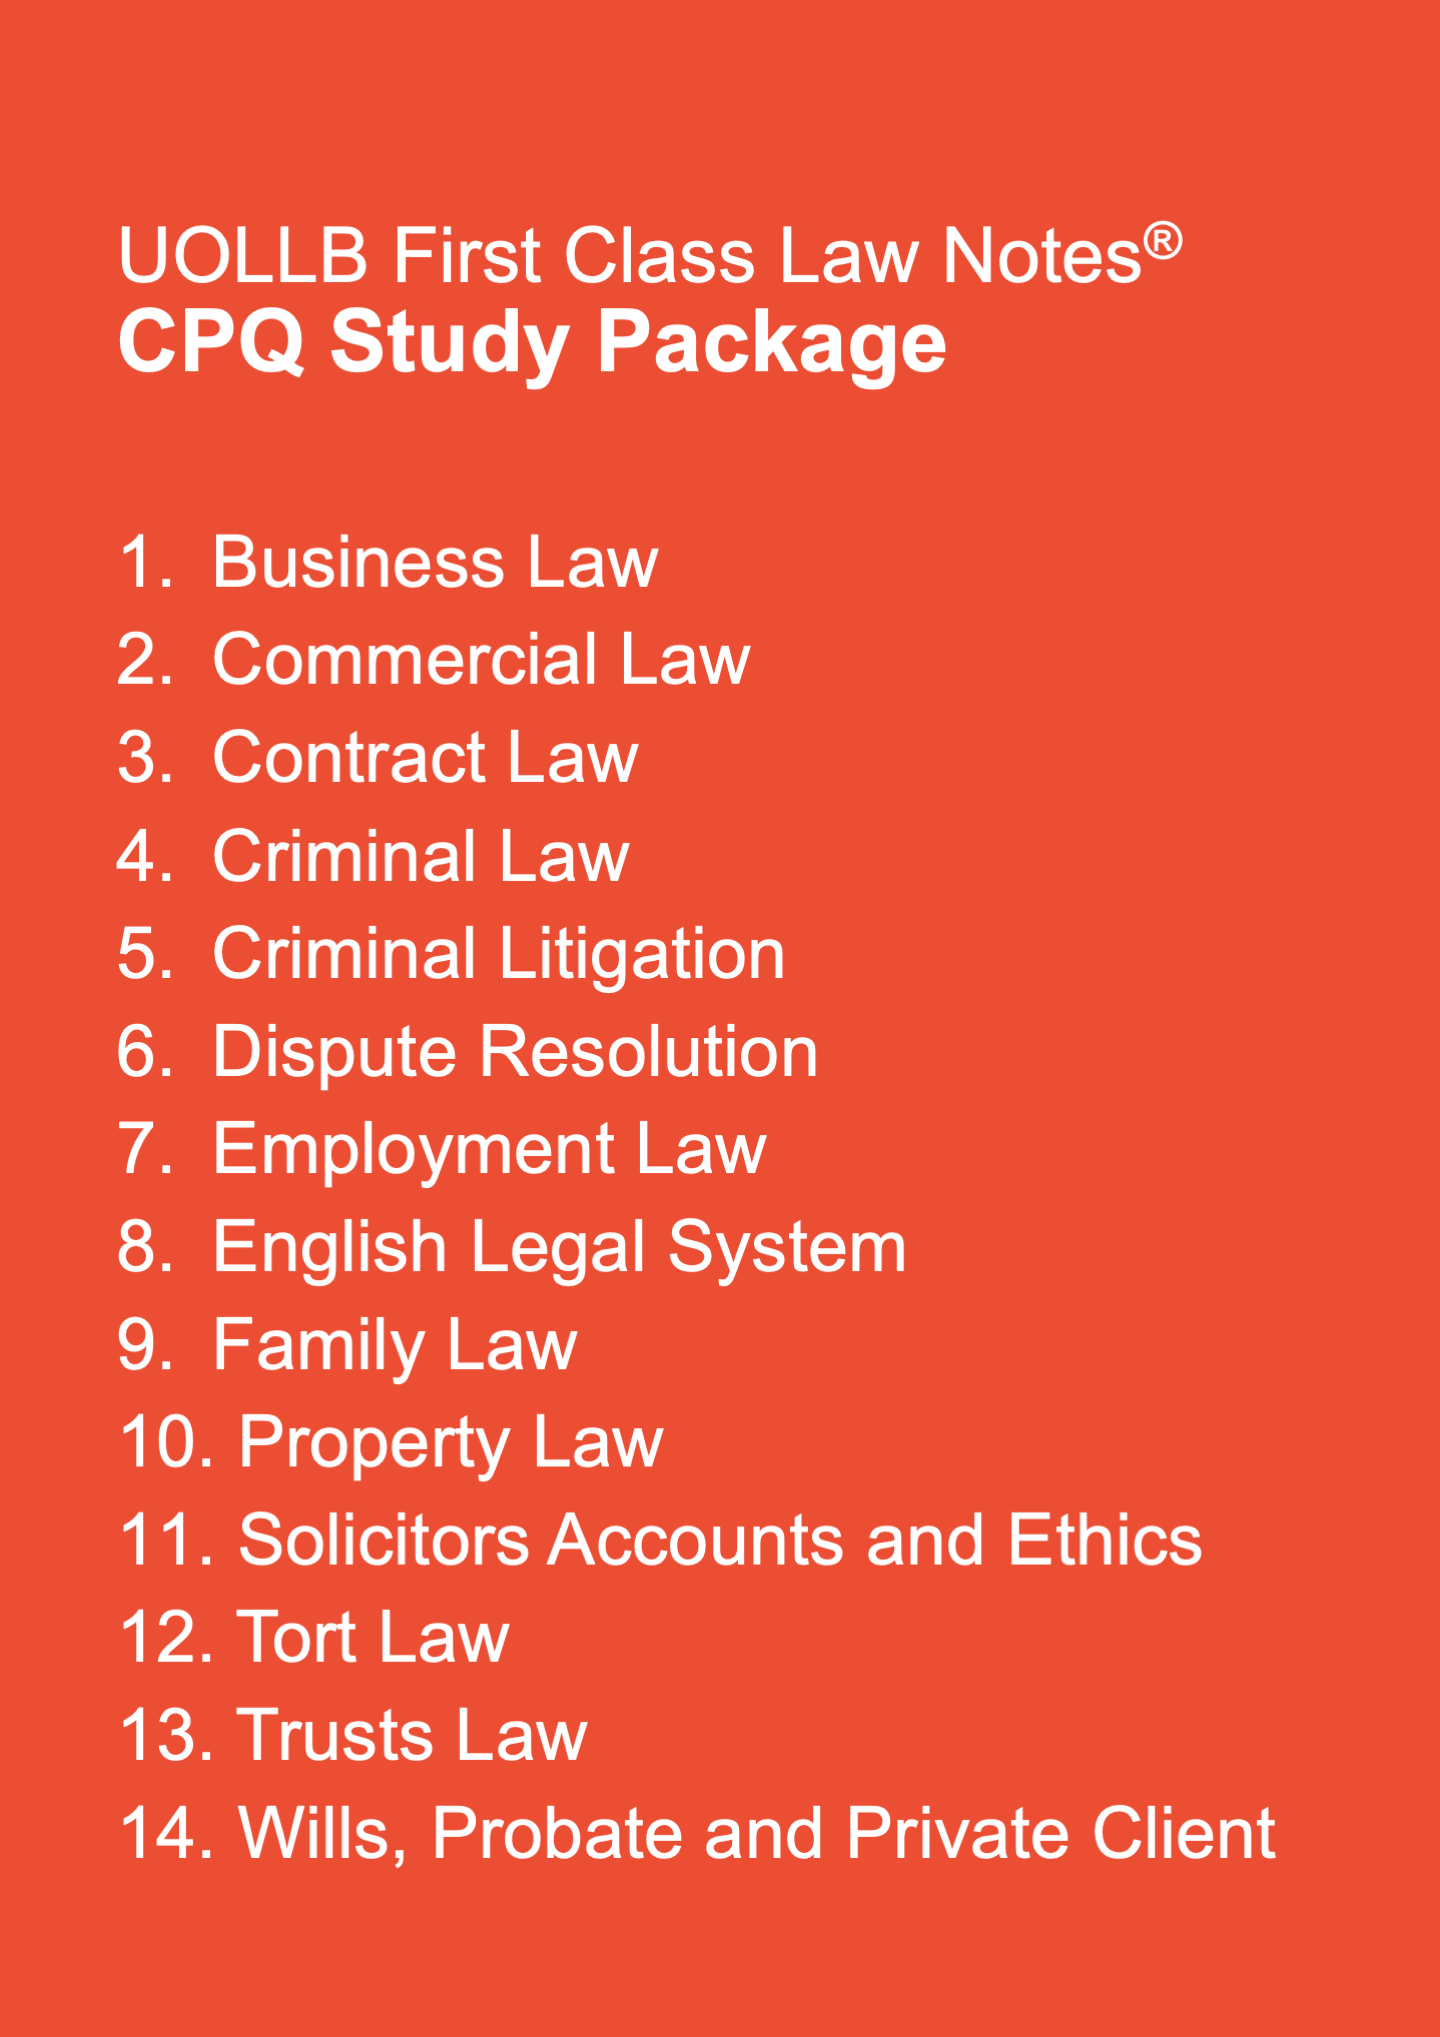 CPQ Study Package